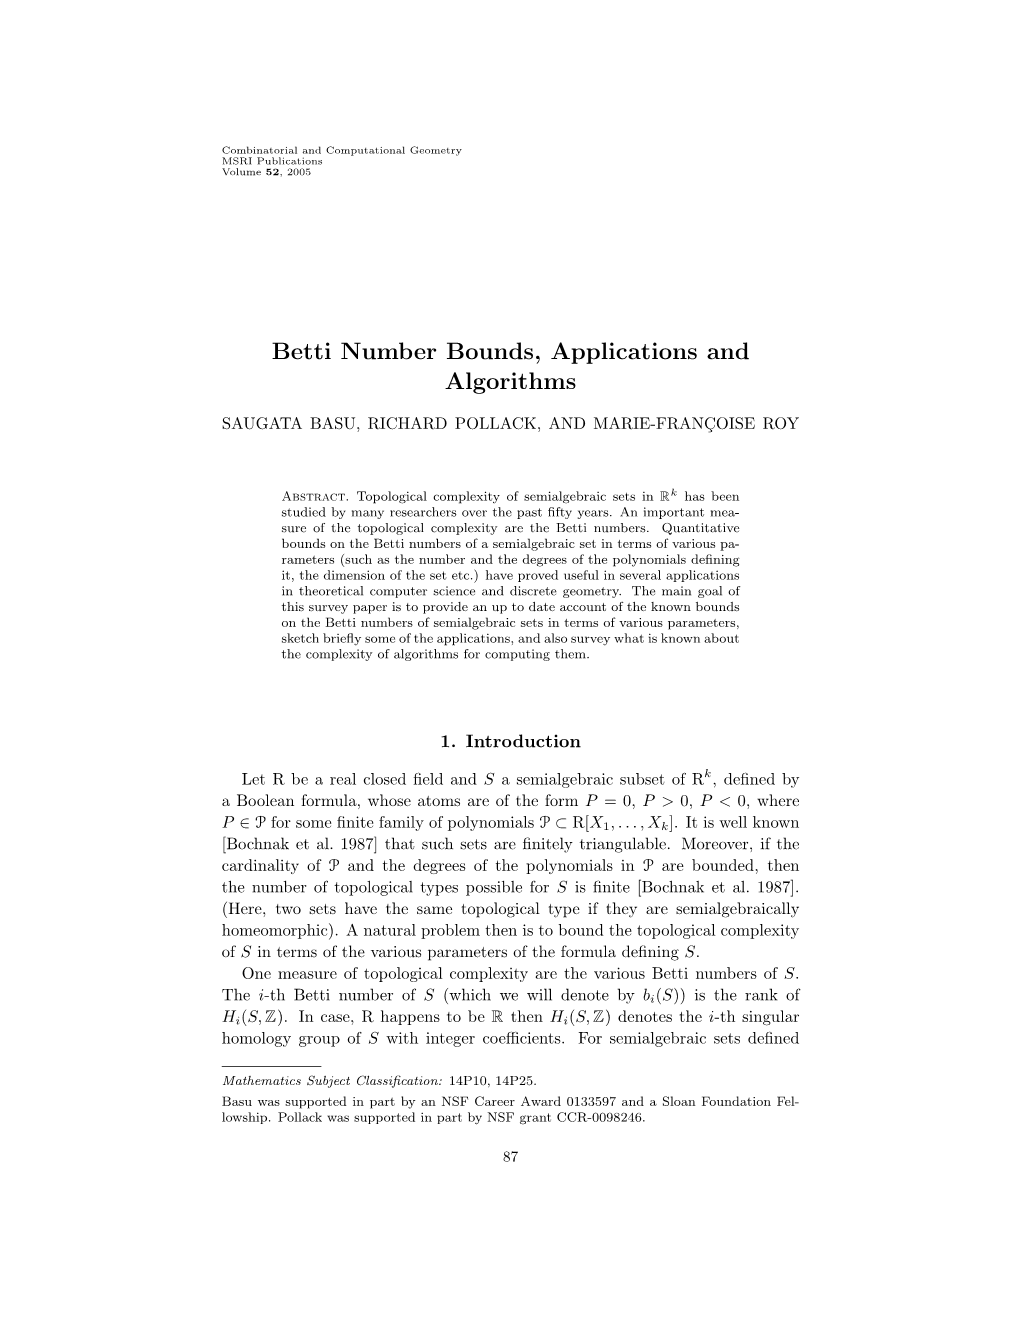 Betti Number Bounds, Applications and Algorithms